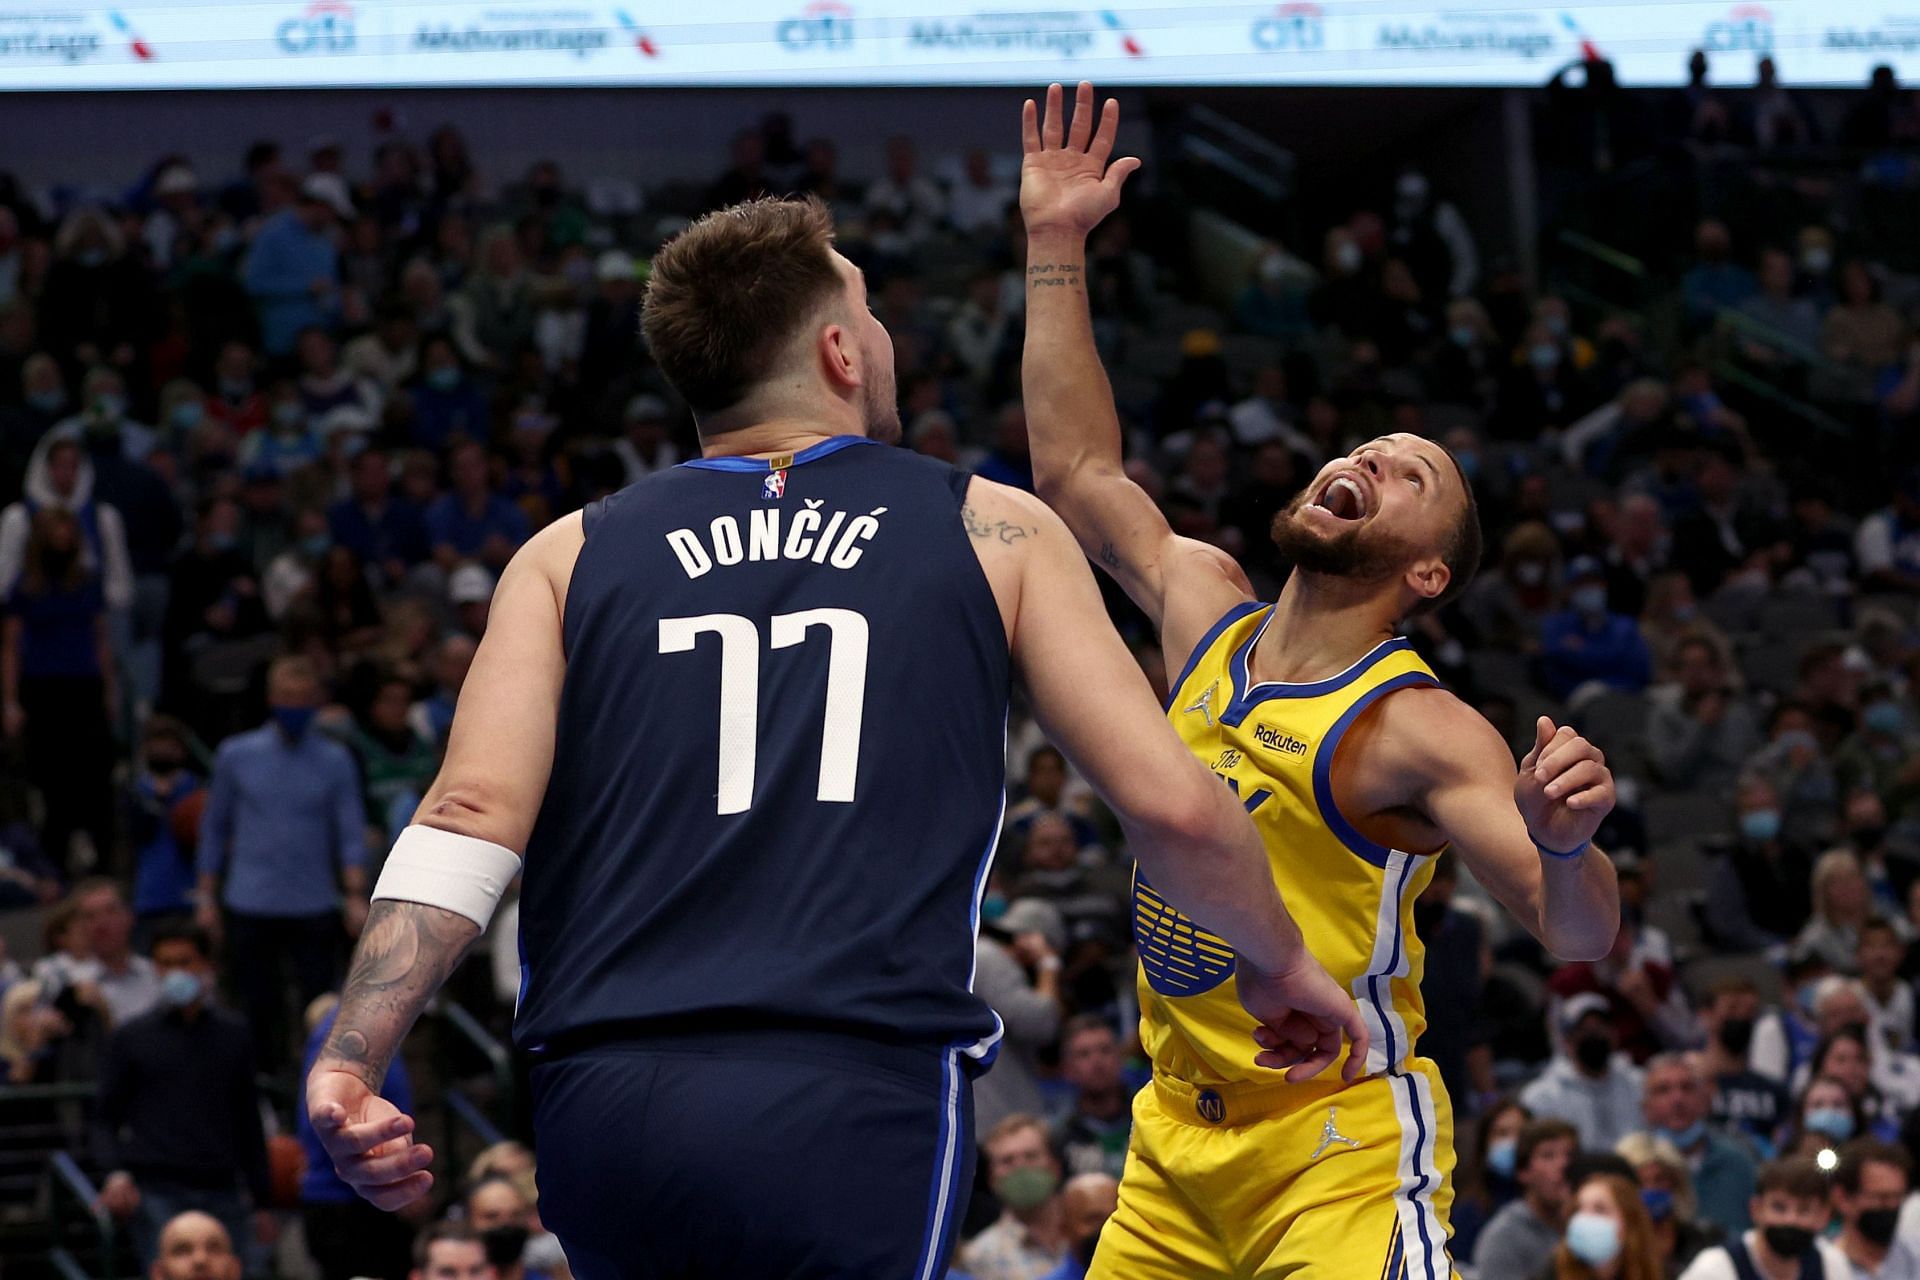 Luka Doncic of the Dallas Mavericks battles Steph Curry of the Golden State Warriors